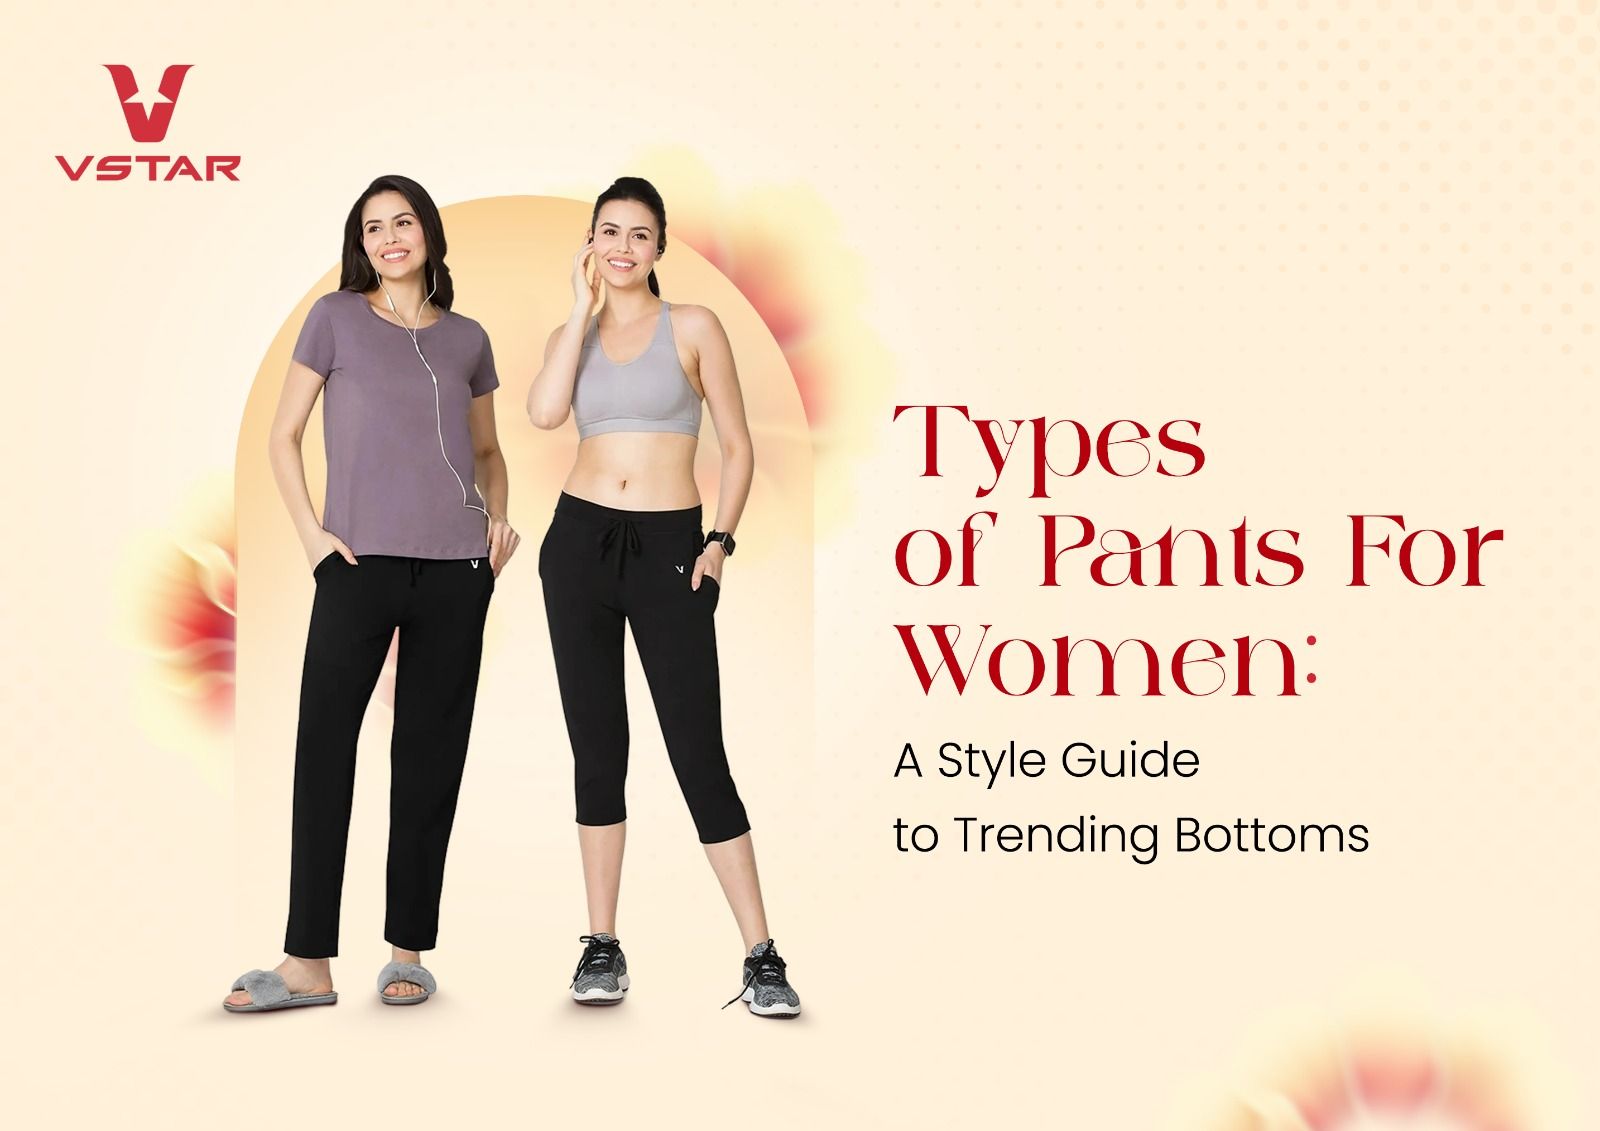 Types of Pants For Women: A Style Guide to Trending Bottoms